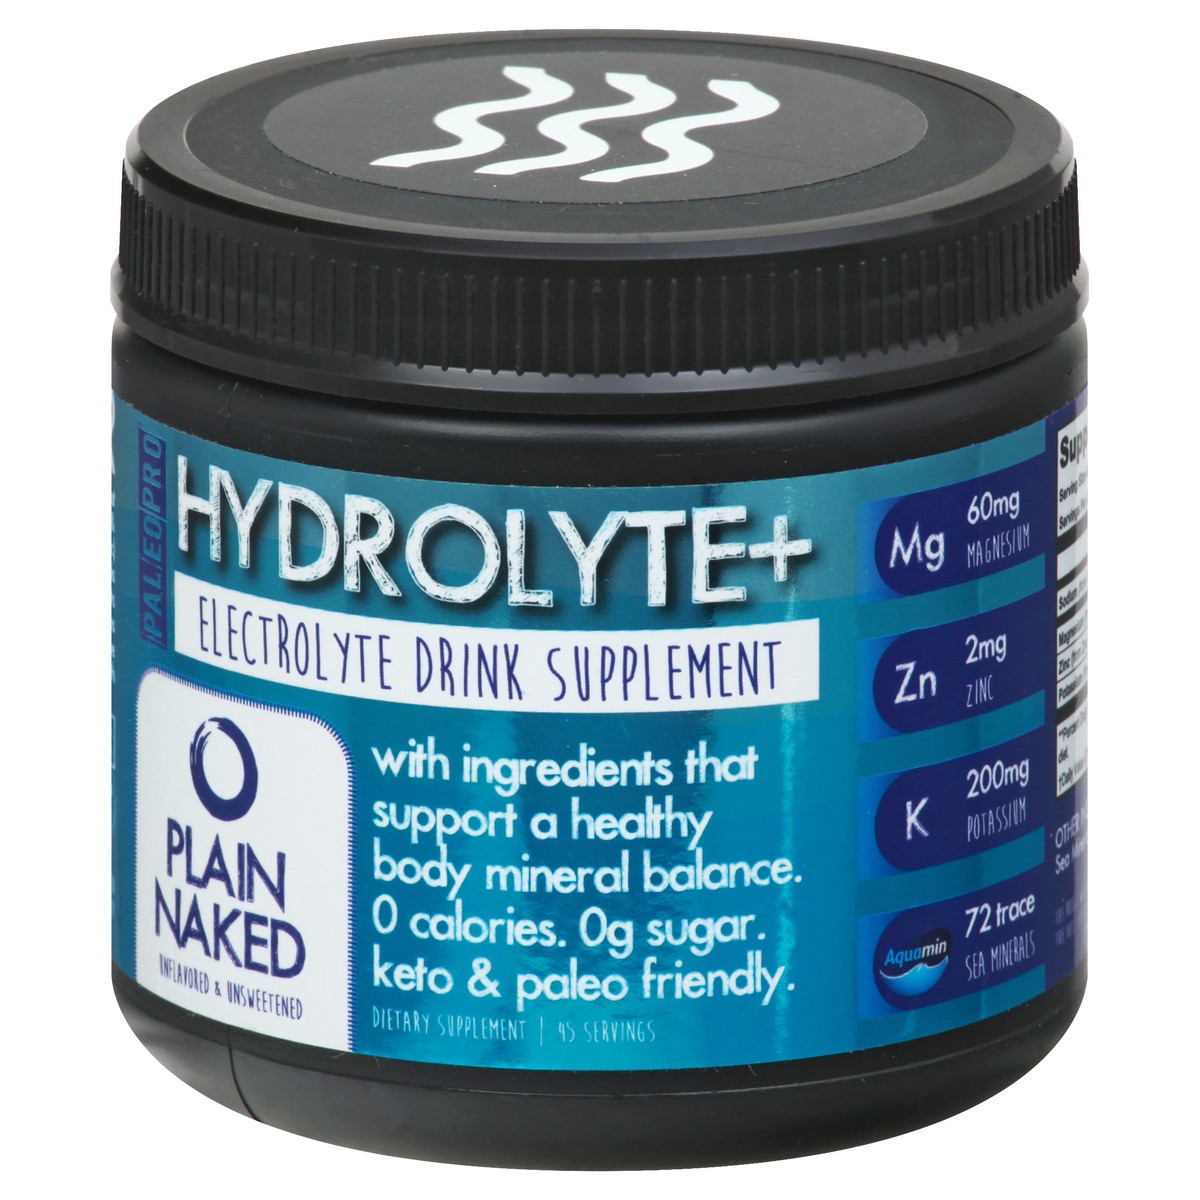 slide 2 of 13, Hydrolyte + Electrolyte Unflavored & Unsweetened Plain Naked Drink Supplement 1 ea, 6.3 oz